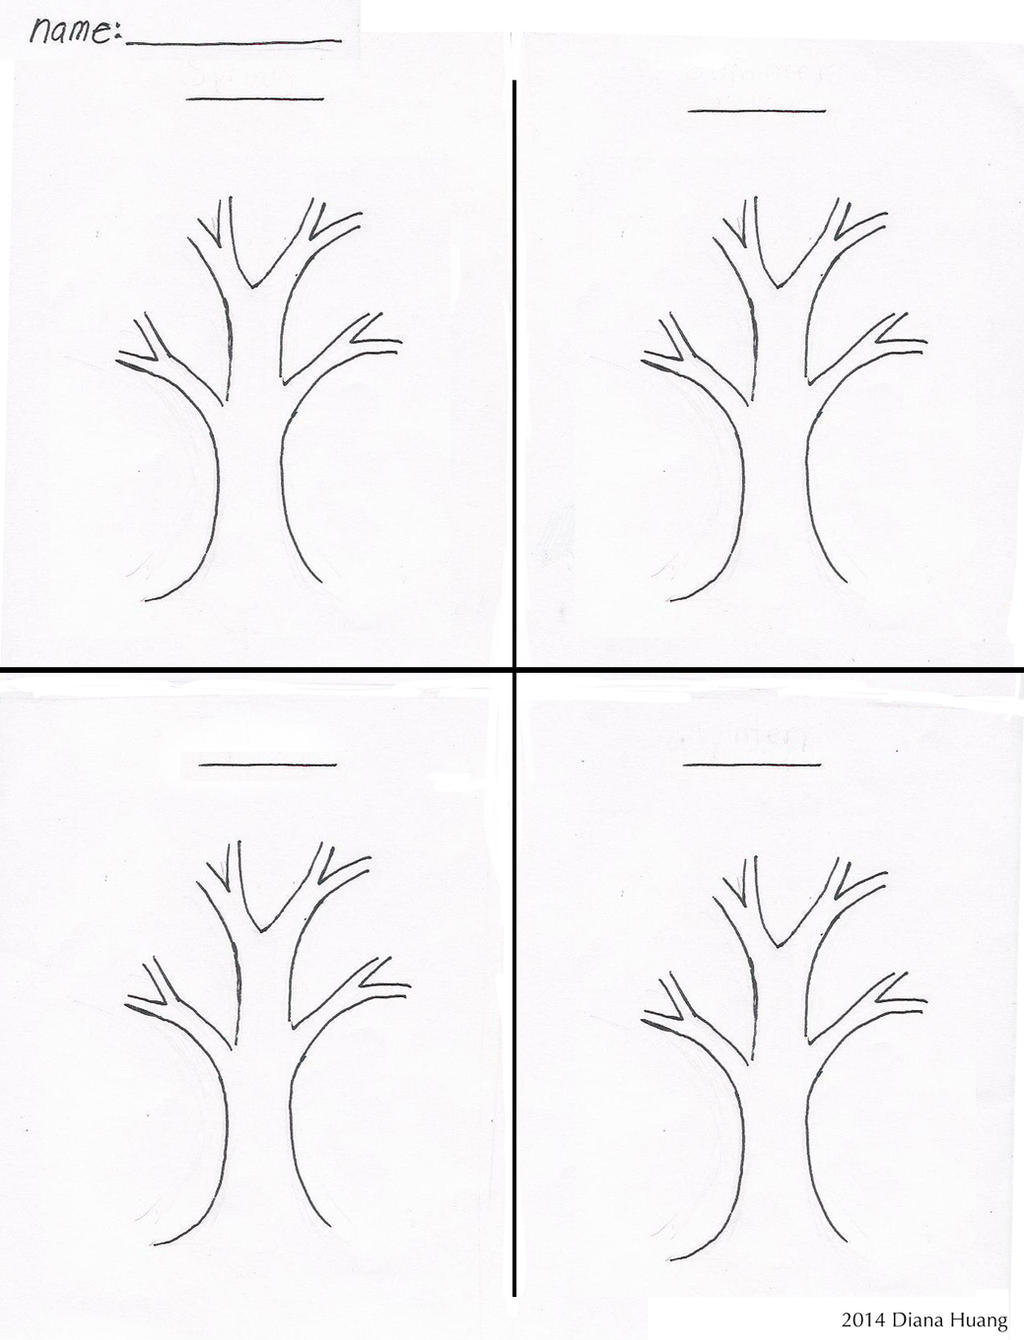 four-seasons-tree-drawing-template-worksheet-by-diana-huang-on-deviantart